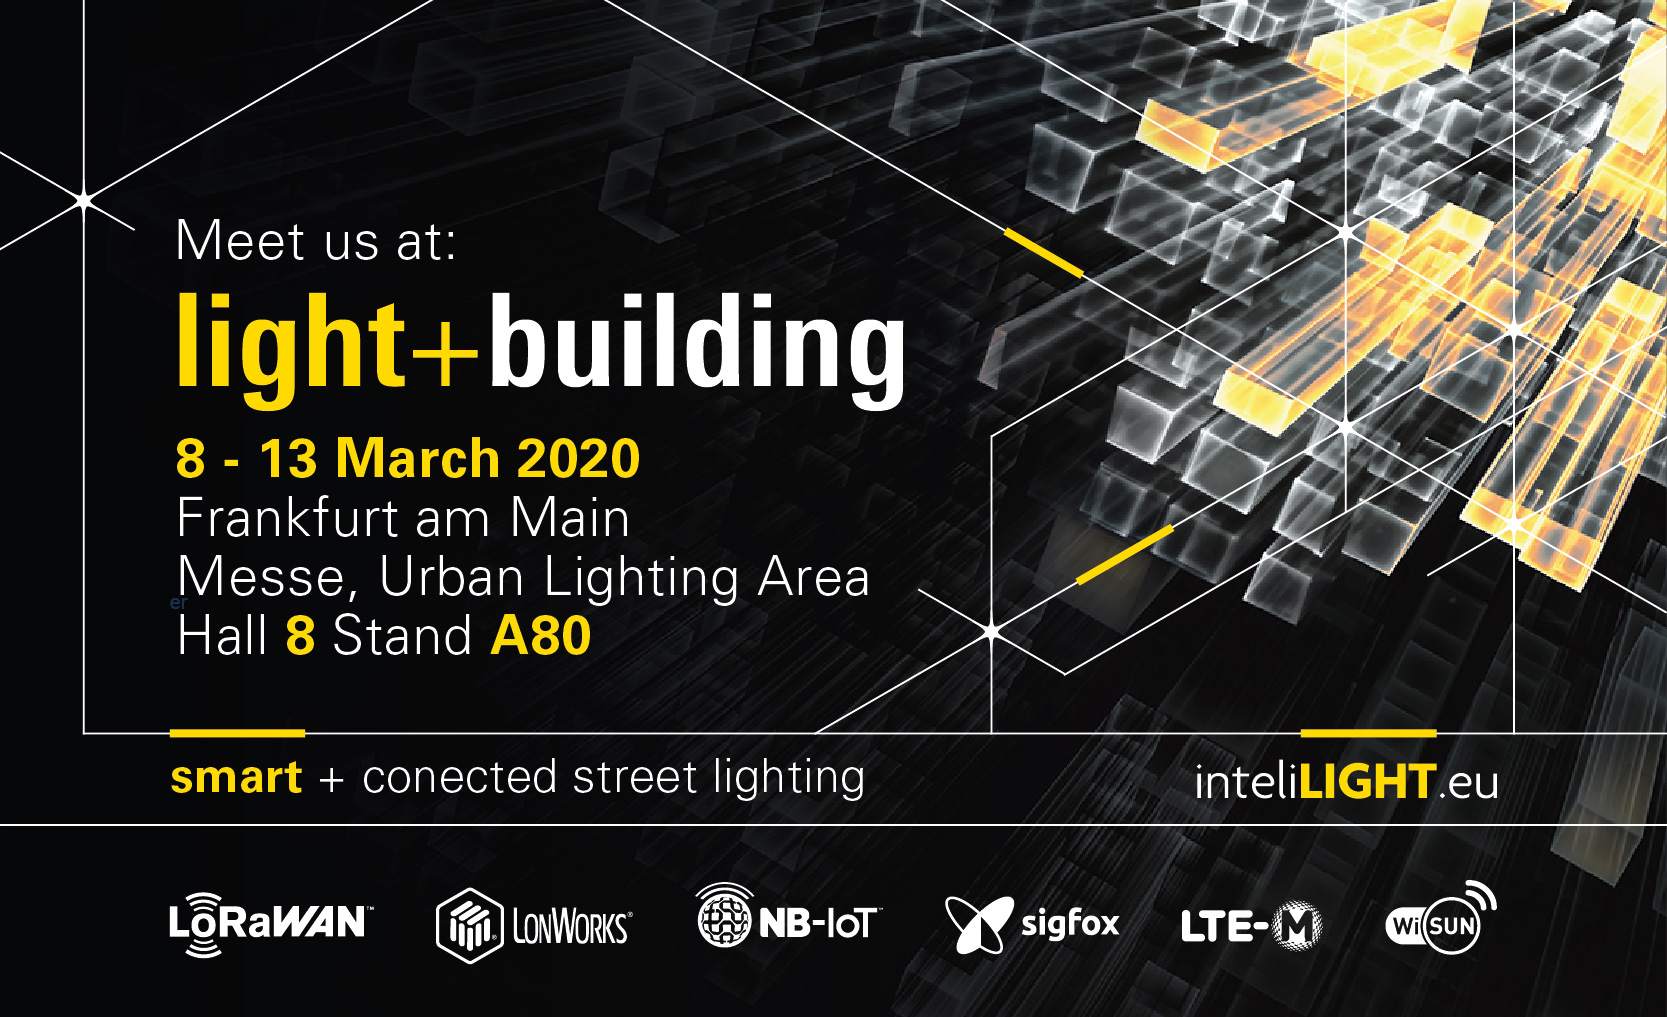 Between 8-13 March 2020, visit us in Frankfurt and experience new features, products and interfaces for smart + connected lighting.